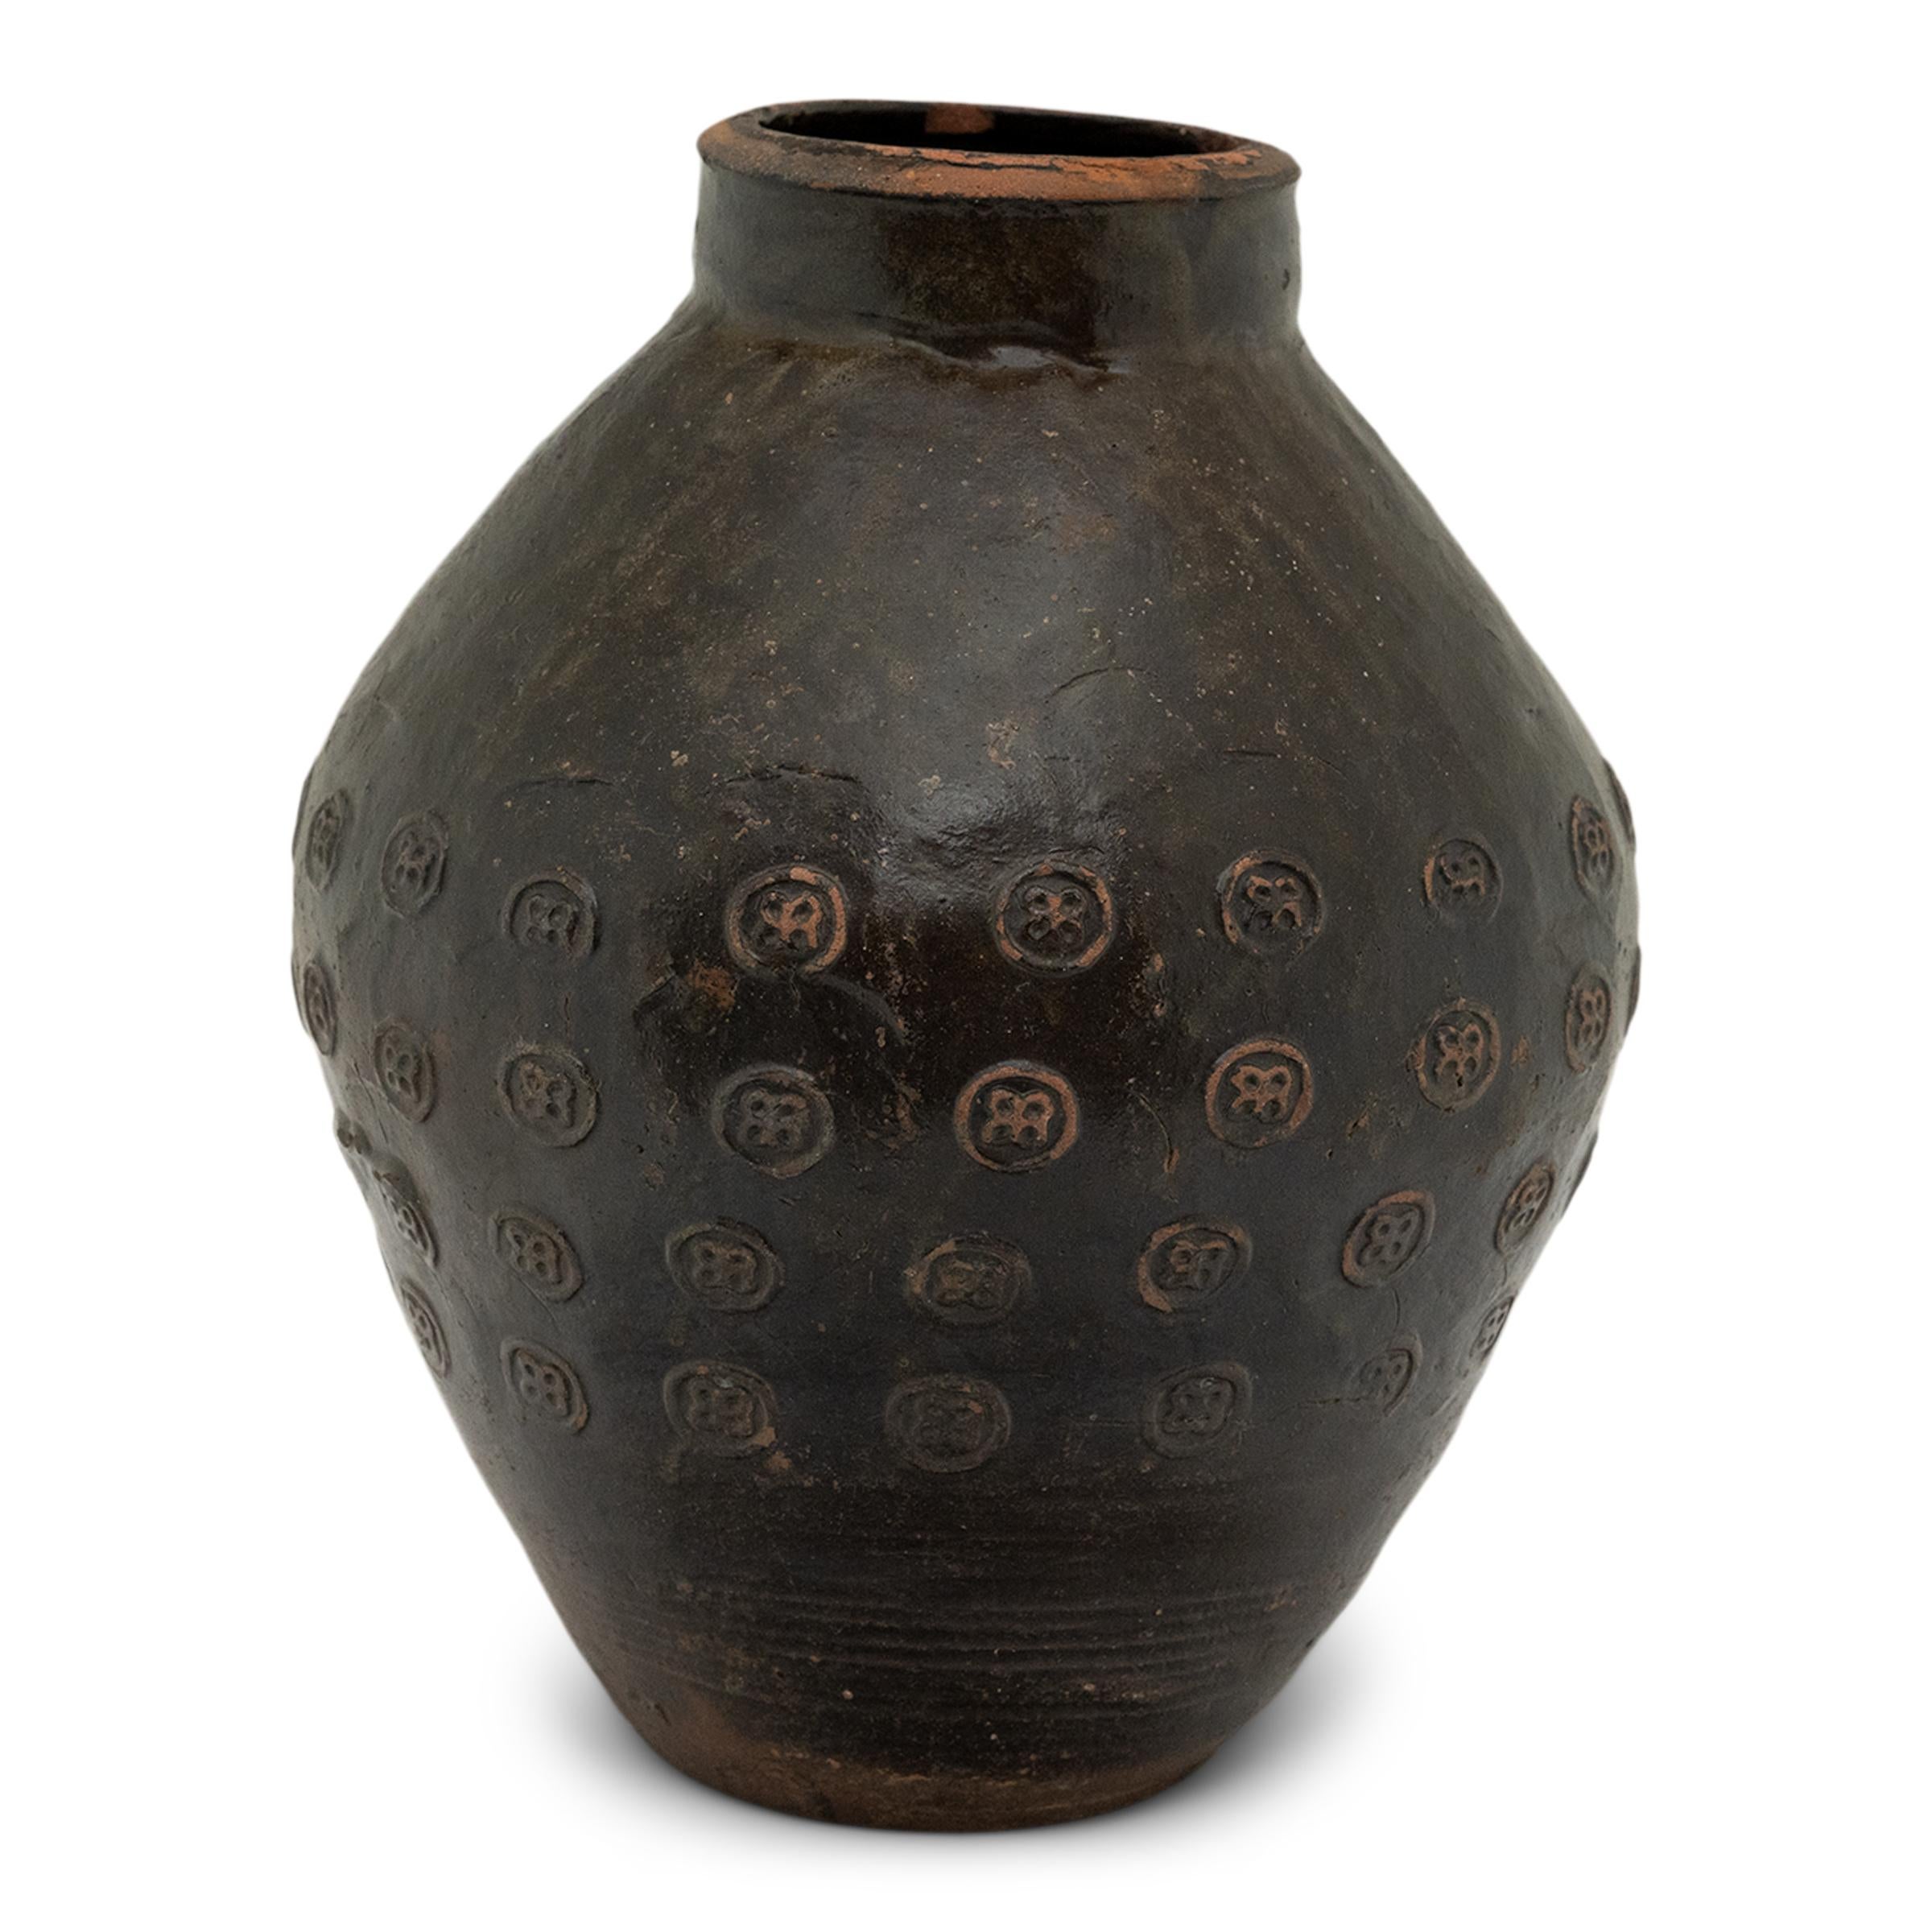 This unique 19th century Chinese earthenware pot is distinguished by its remarkable stamp pattern. With a brown drip glaze, this vase features a bulbous shaped body that stands on a flat unglazed base. The round body tapers to a constricted neck,